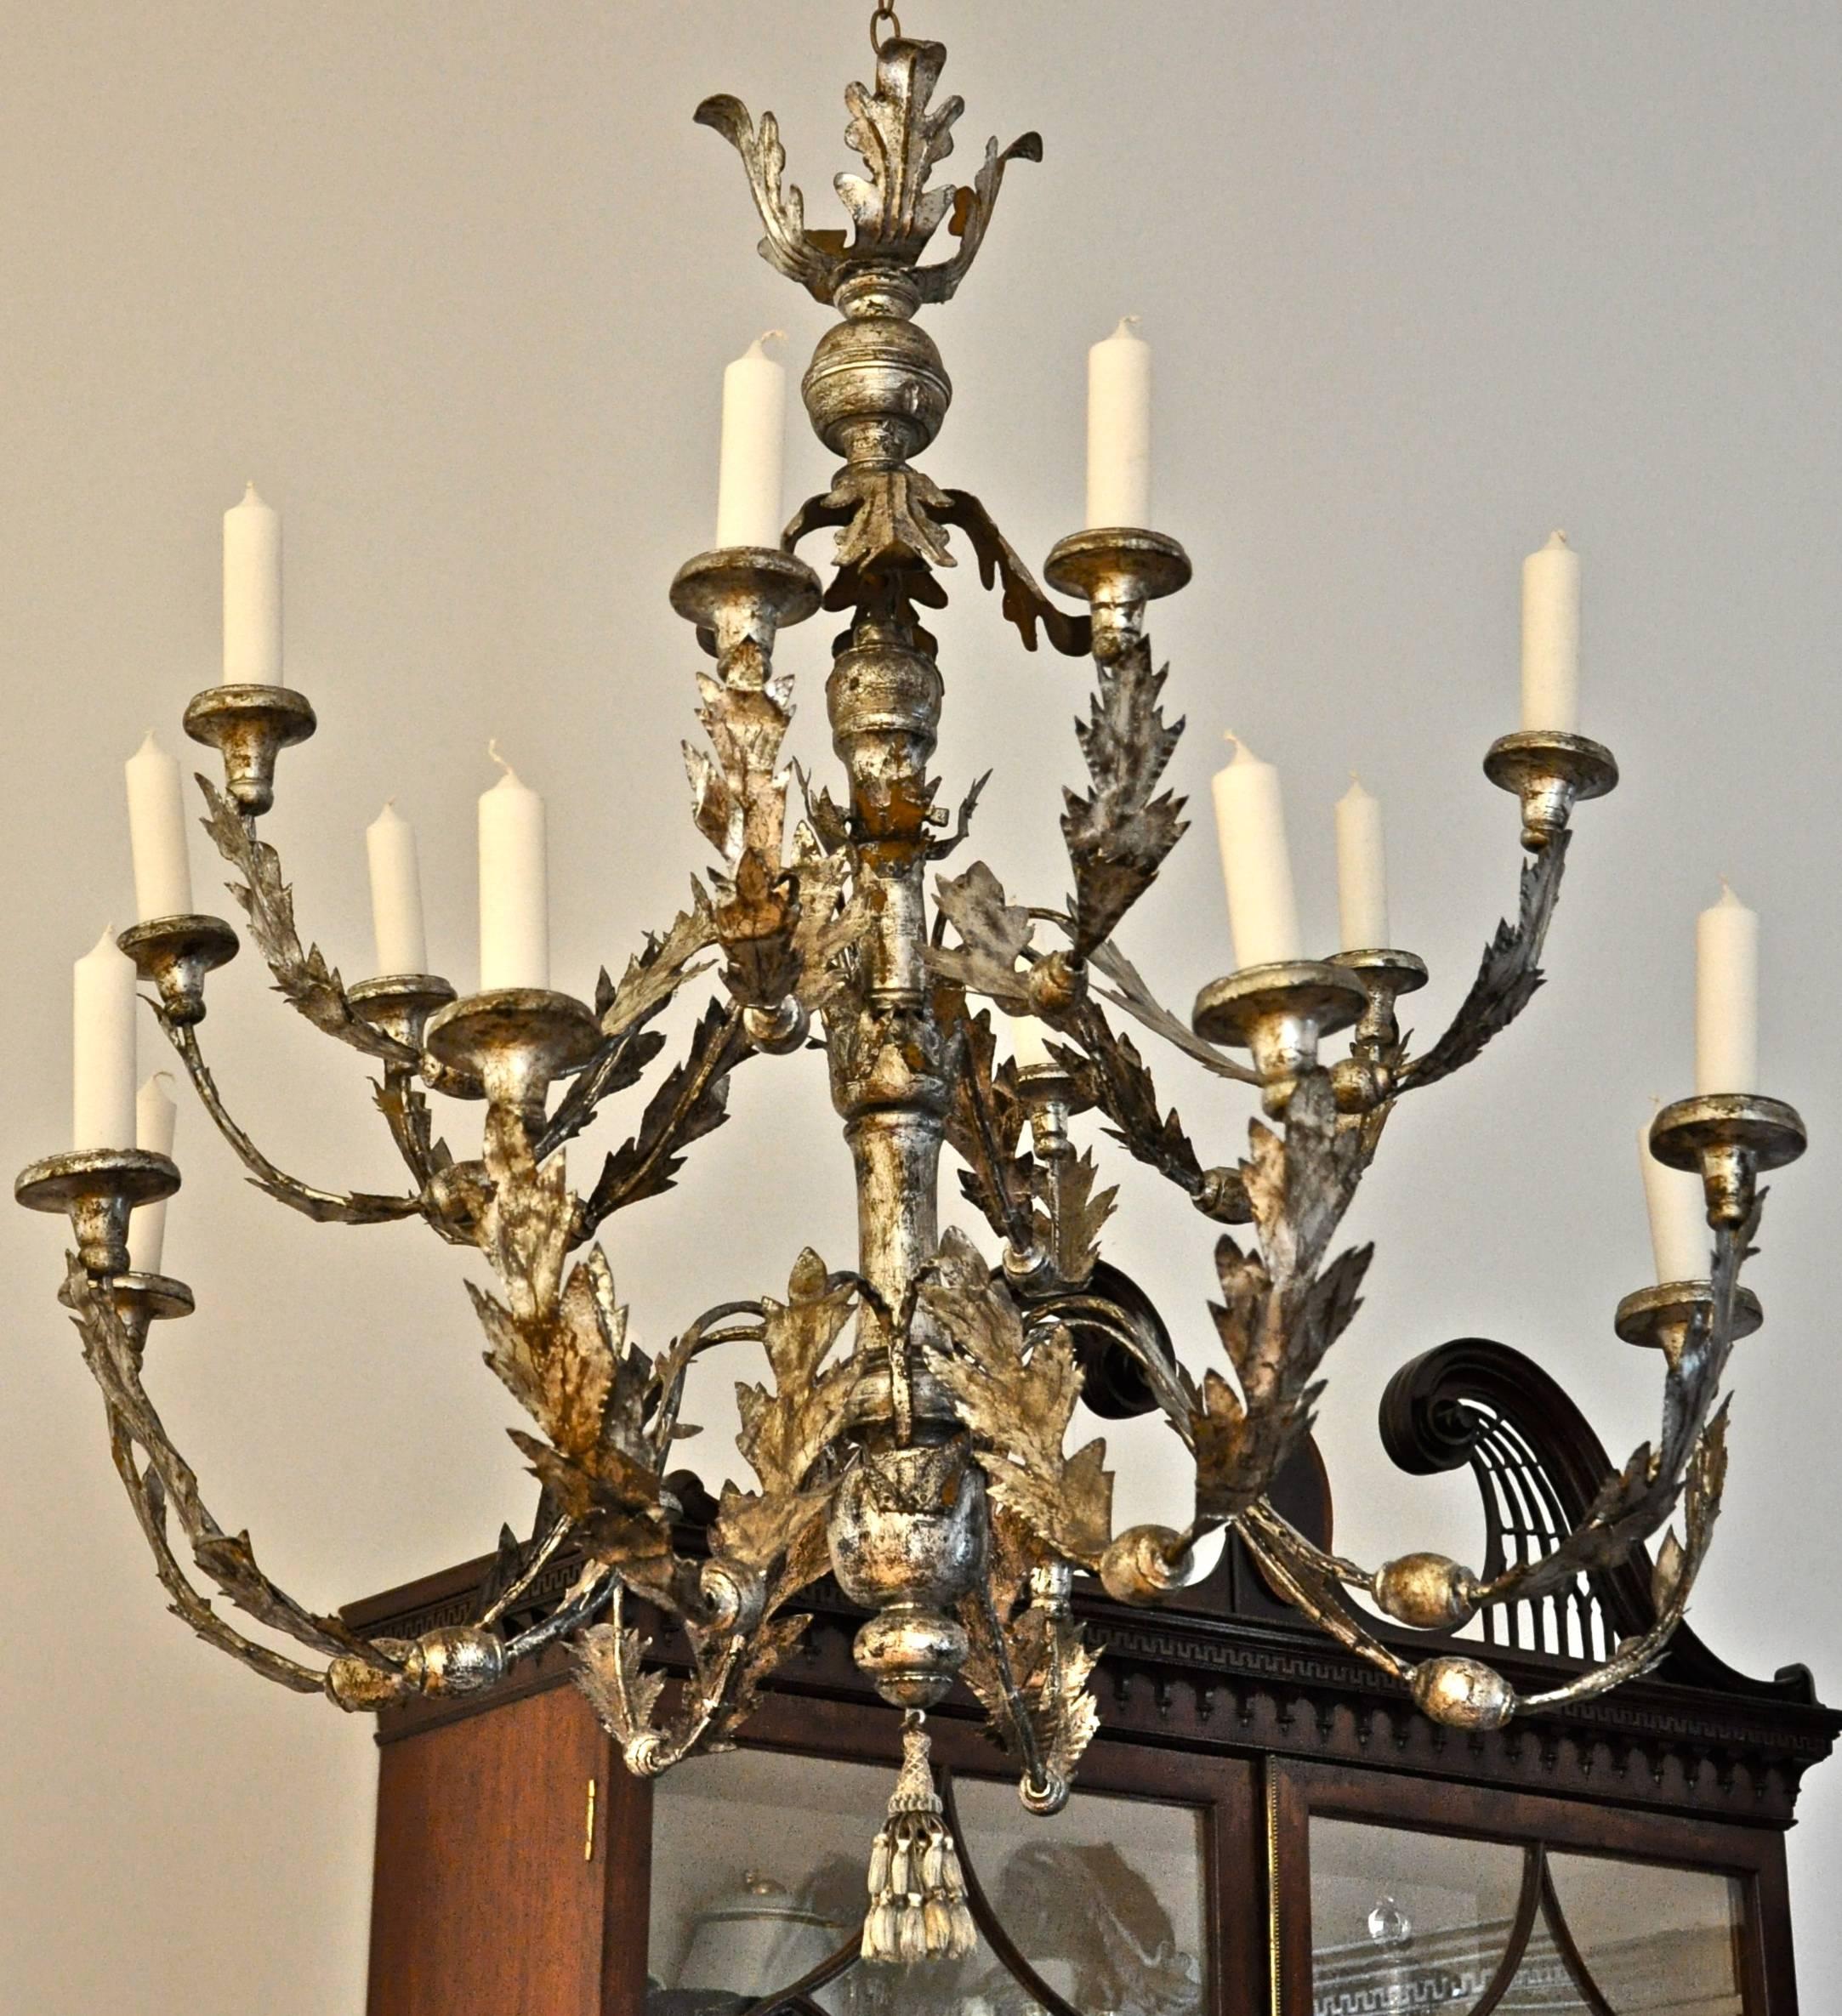 Period 18th century silver gilt chandelier, Italian

16 pricket lights, original iron and tole arms, foliate neoclassical design
Original throughout
Wonderful patina.